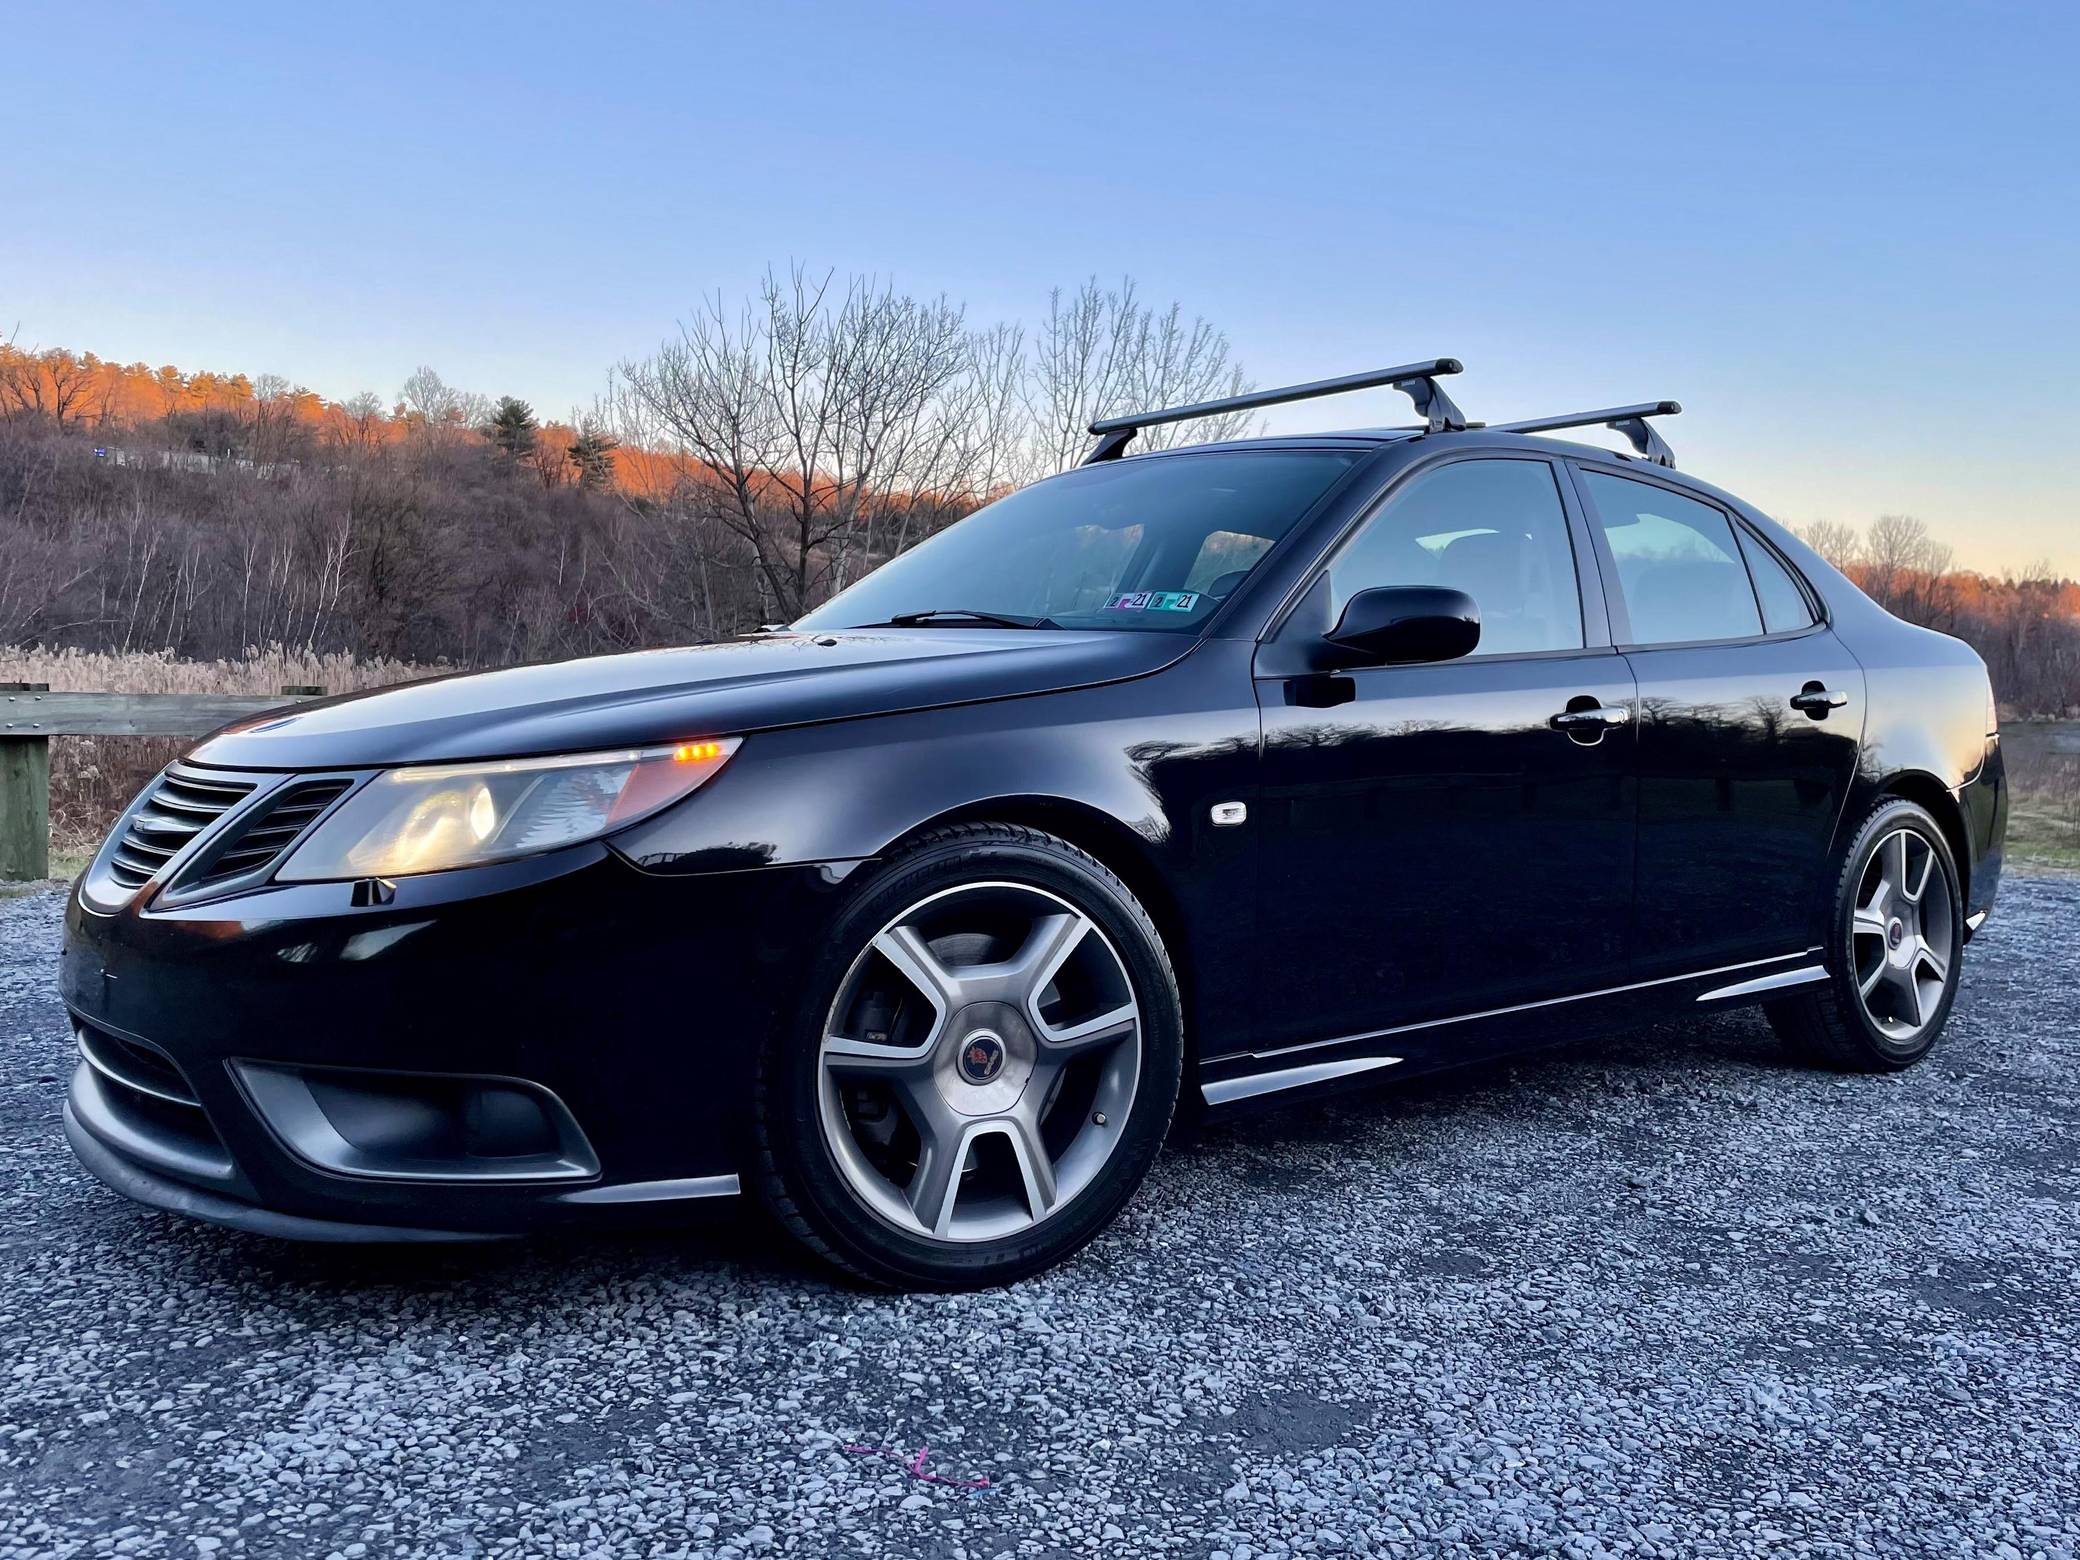 The last Saab 9-3 ever made is heading to auction